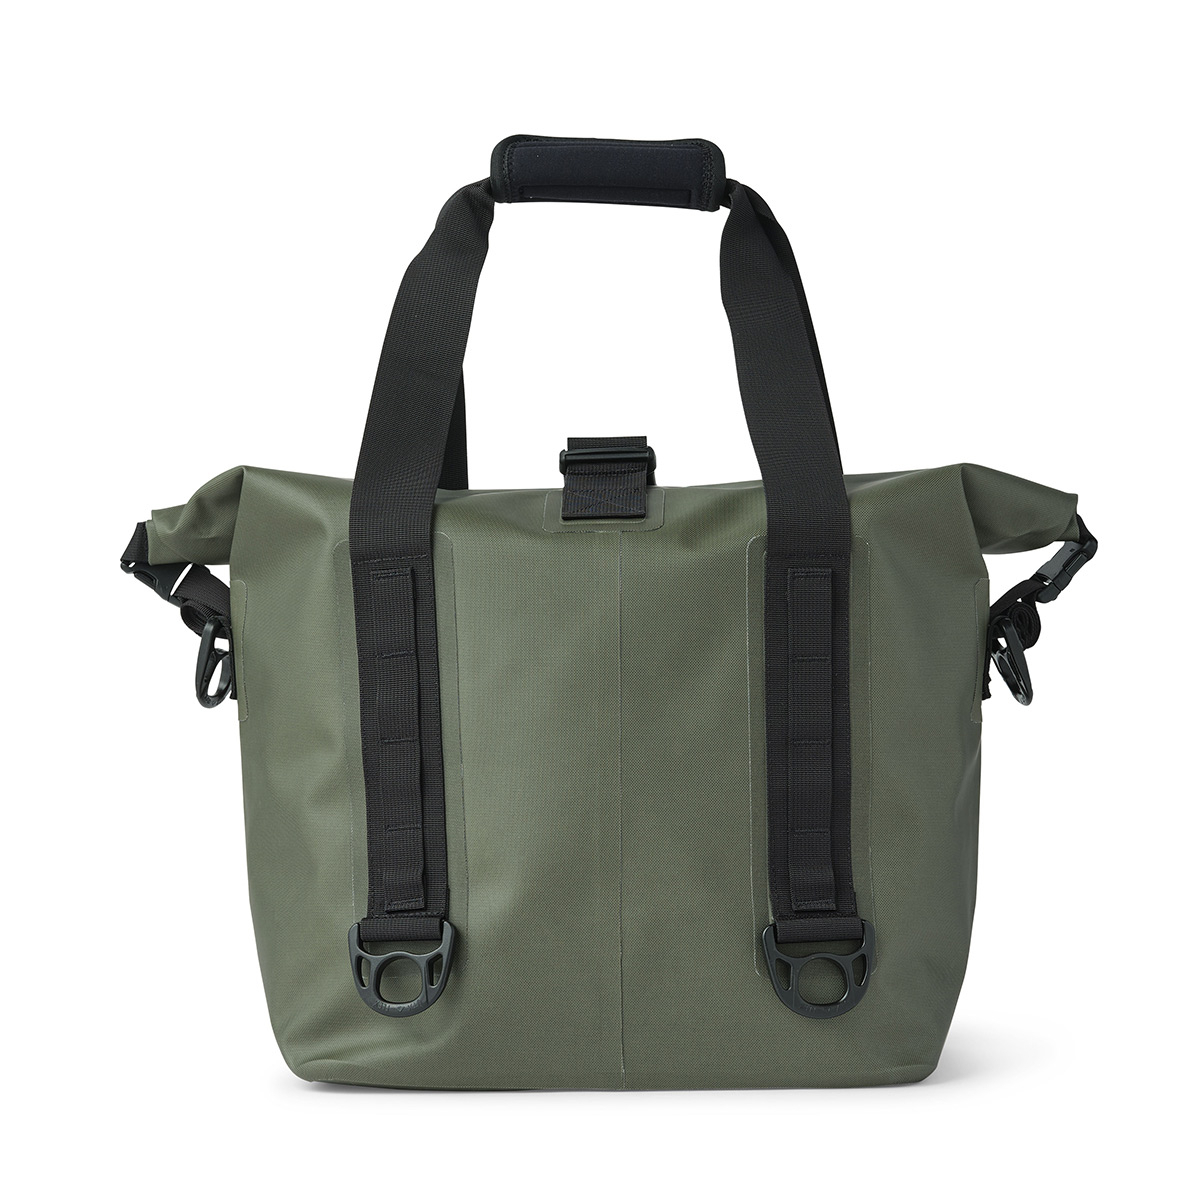 Filson Dry Roll-Top Tote Bag Green, keeps your gear dry in any weather